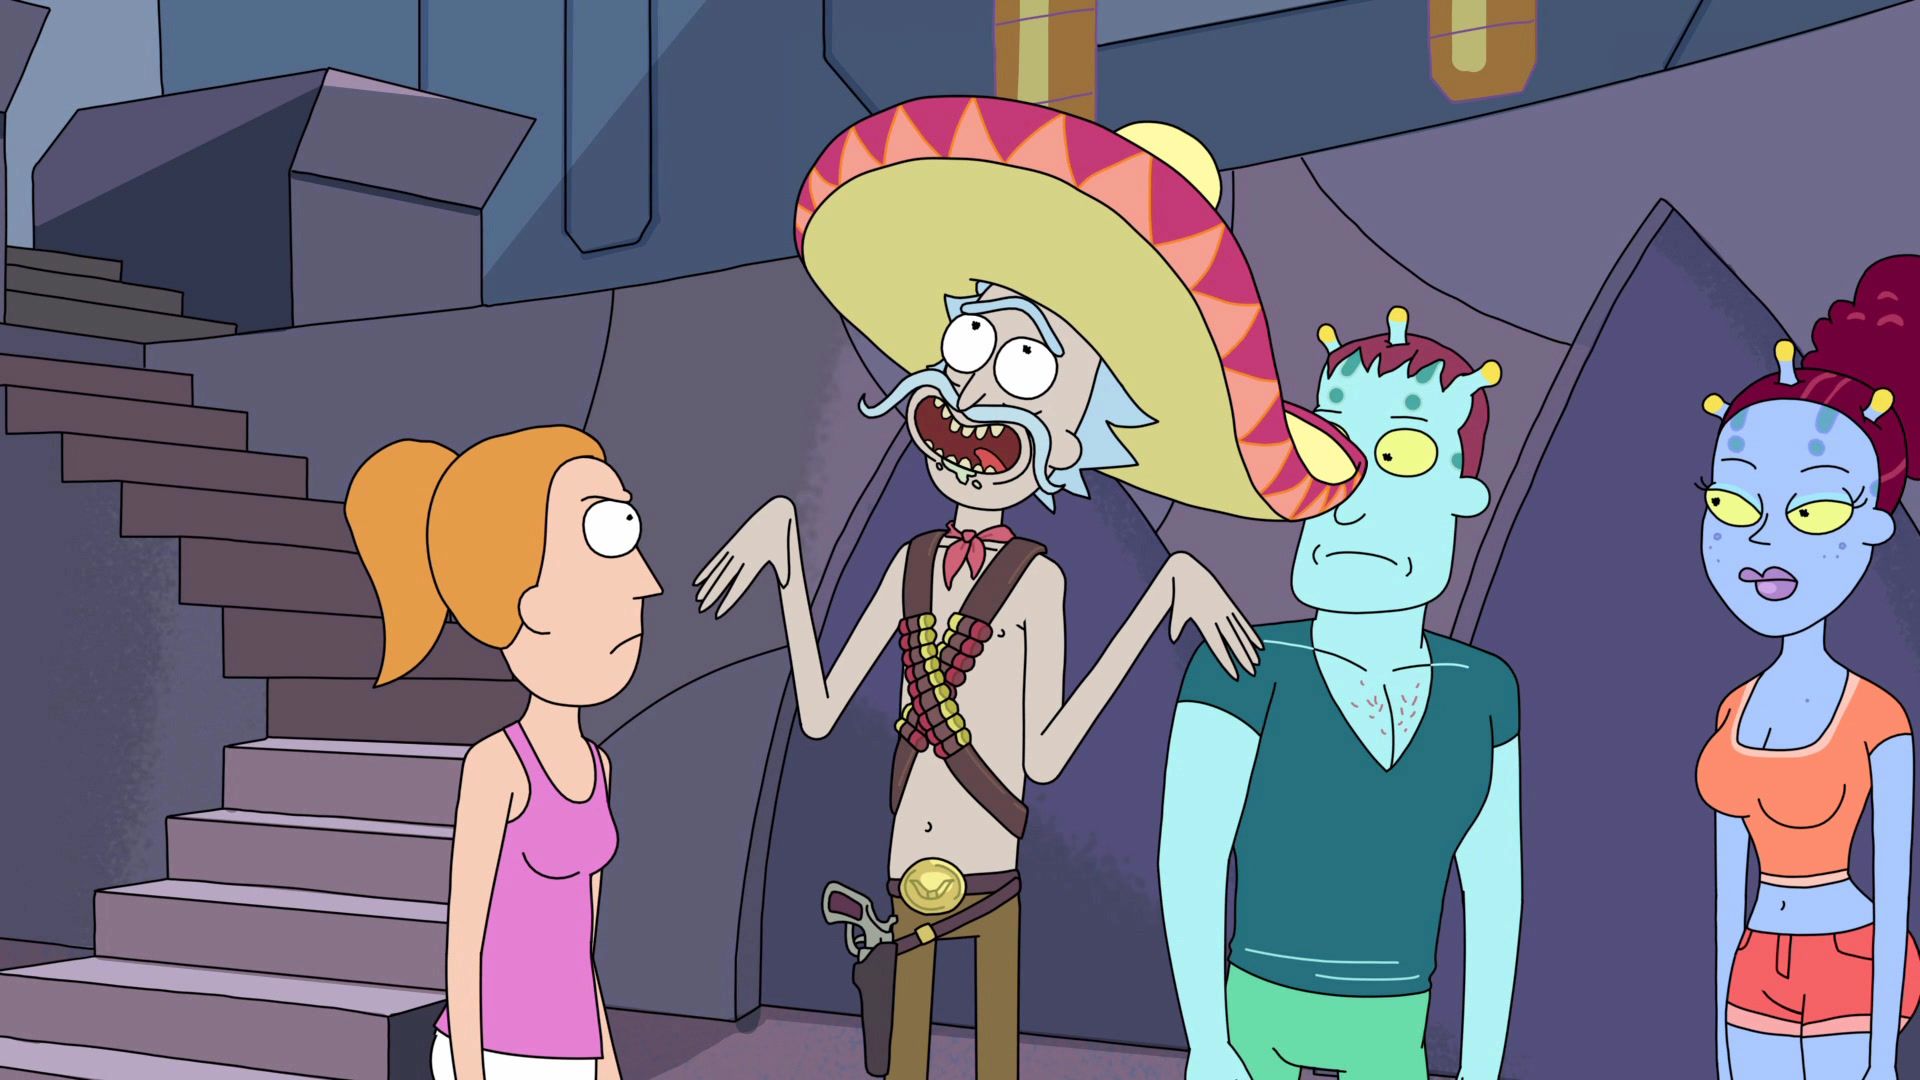 Rick laughing off a joke  while Morty's mom looks at him mad.